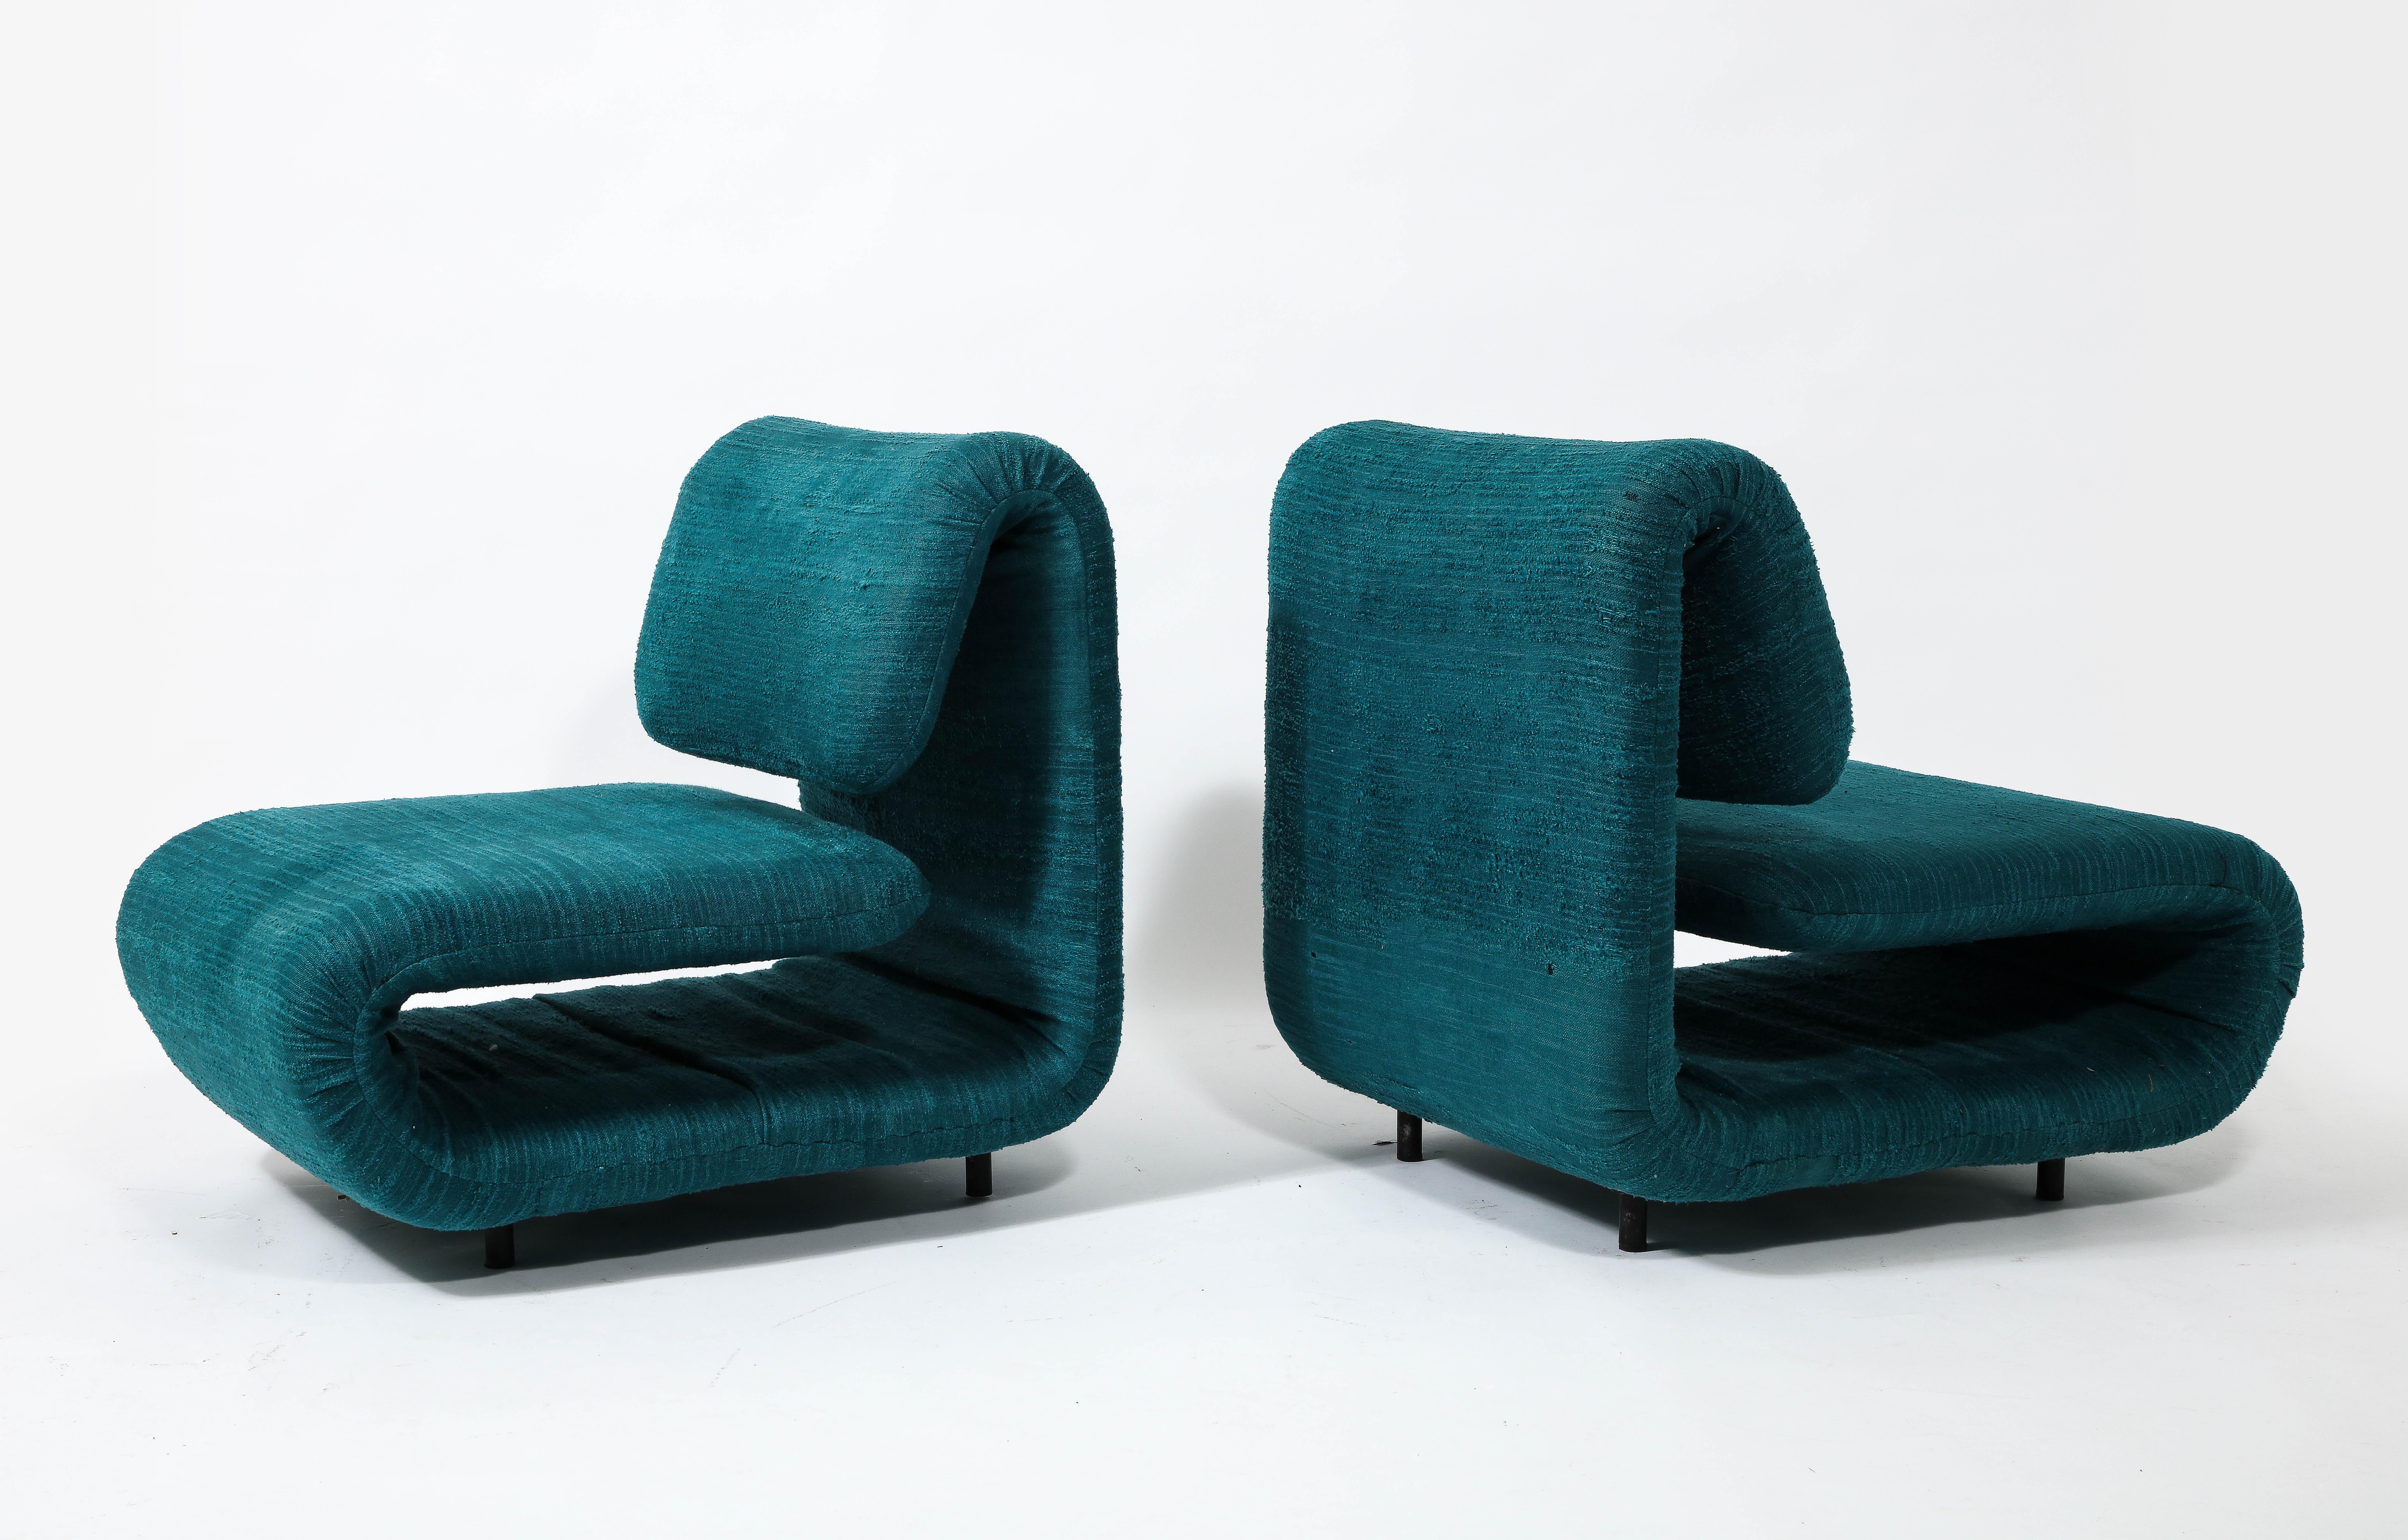 Etienne-Henri Martin Pair of 1500 Slipper Lounge Chairs in Teal, France 1960's For Sale 1